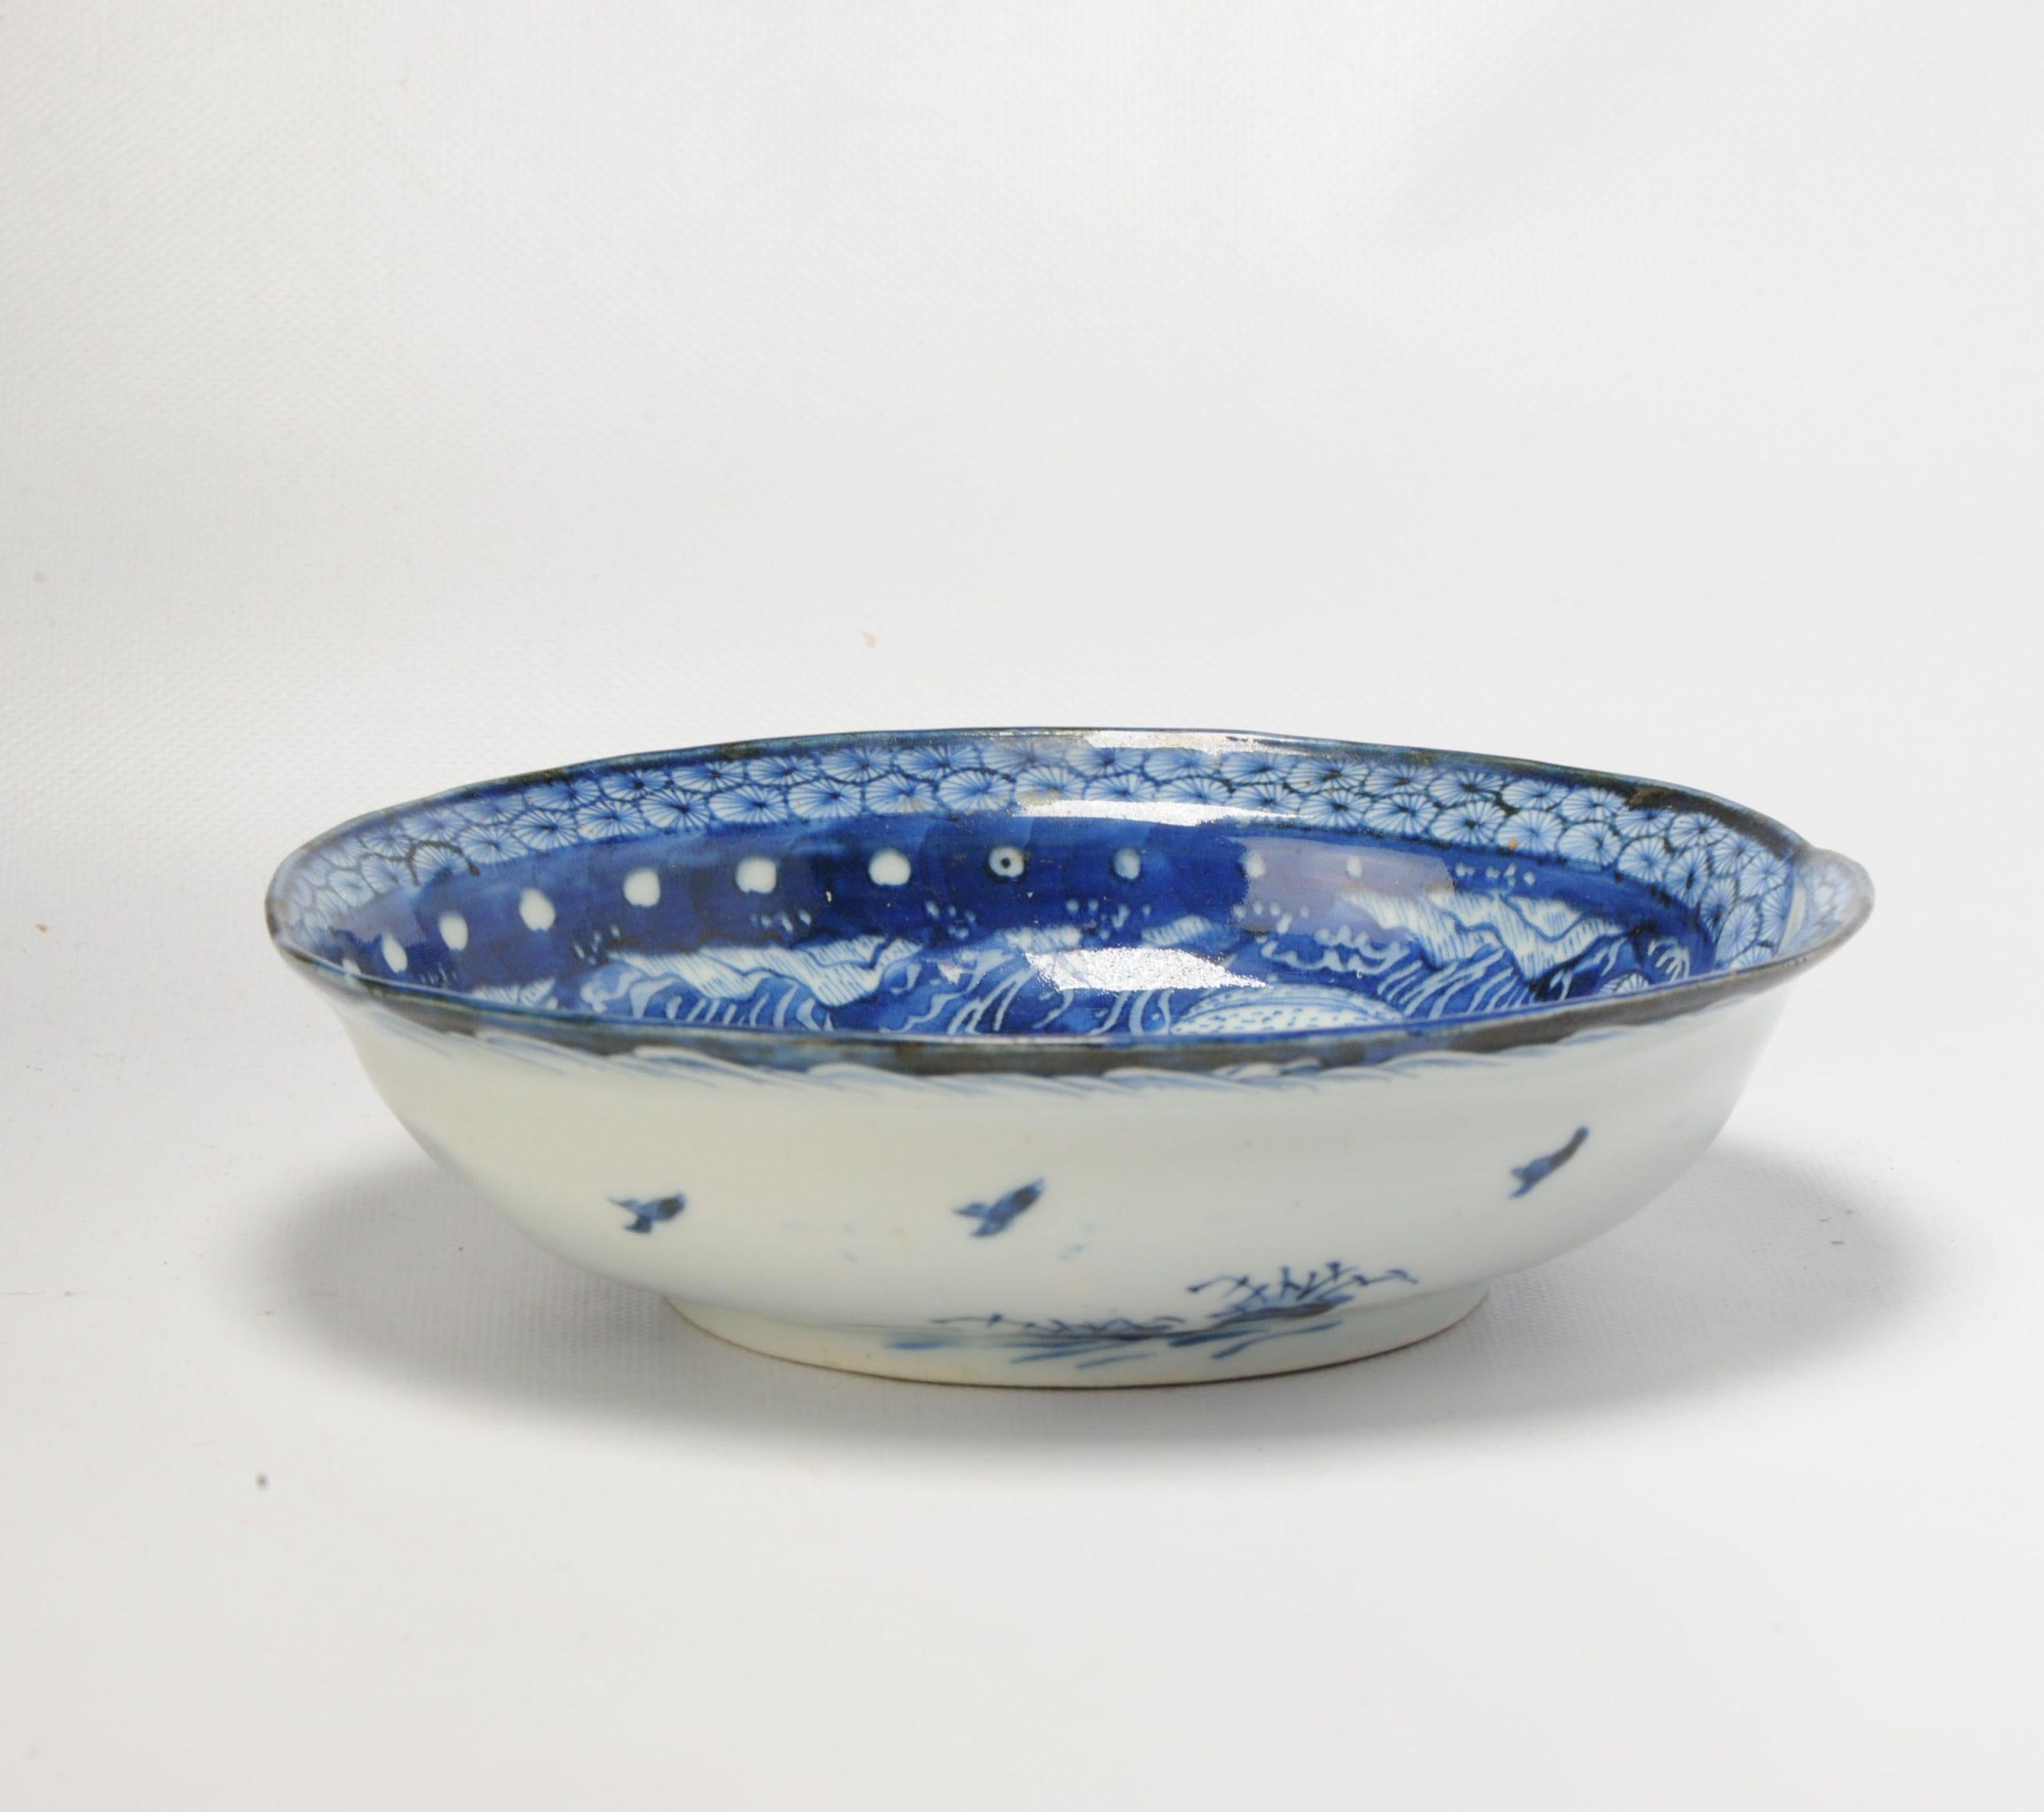 Antique Edo Period Japanese Arita Sea Bottom Bowl Blue White Seafood Dish In Good Condition For Sale In Amsterdam, Noord Holland